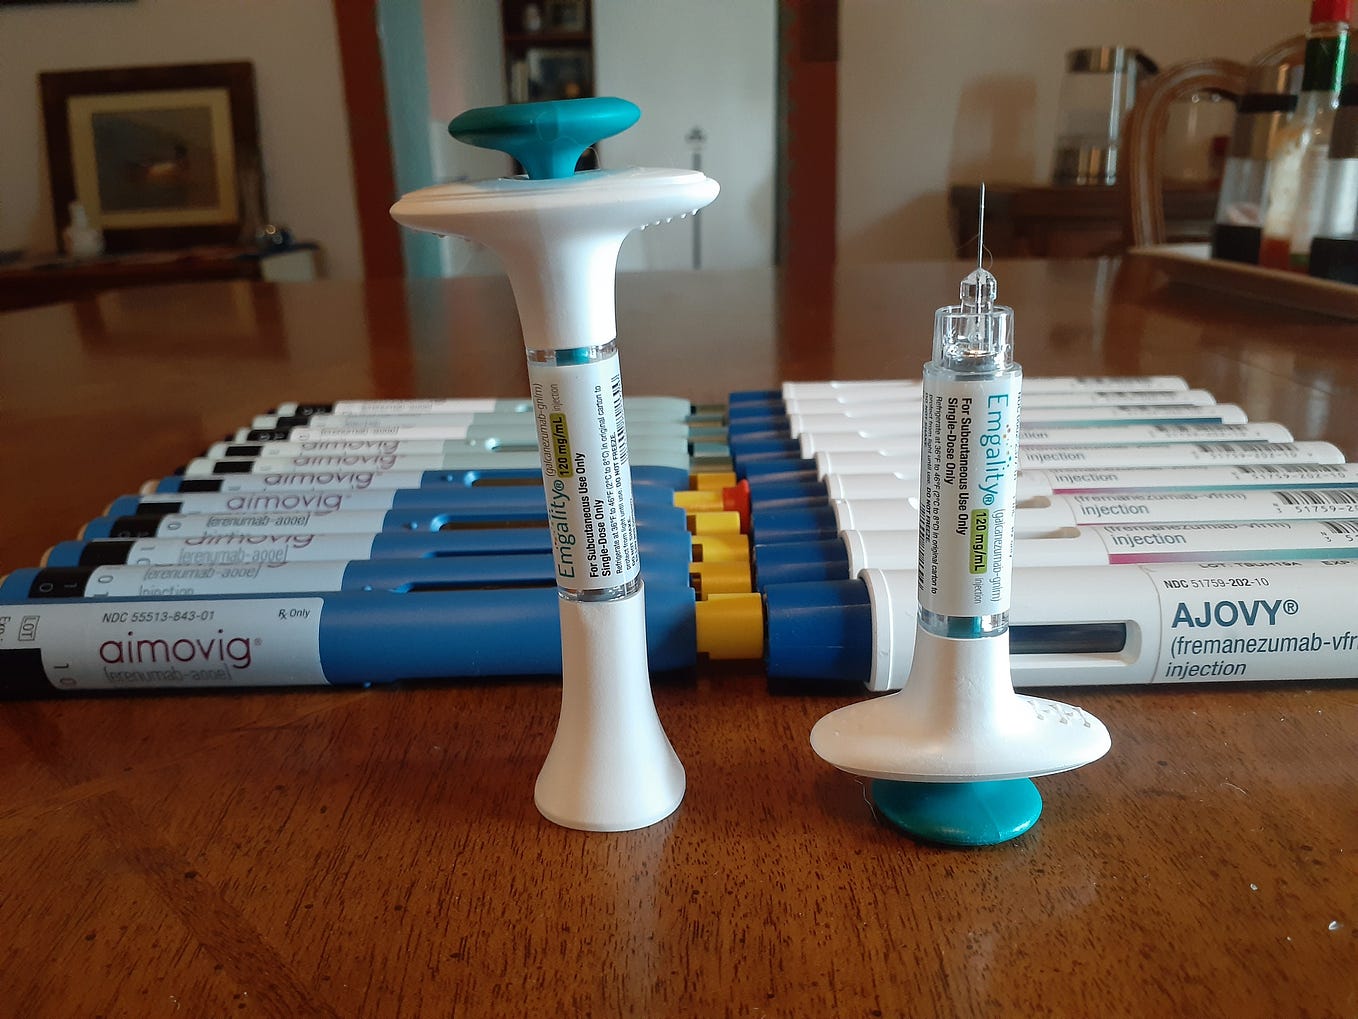 20+ autoinjectors fronted by two prefilled syringes on a dining room table.